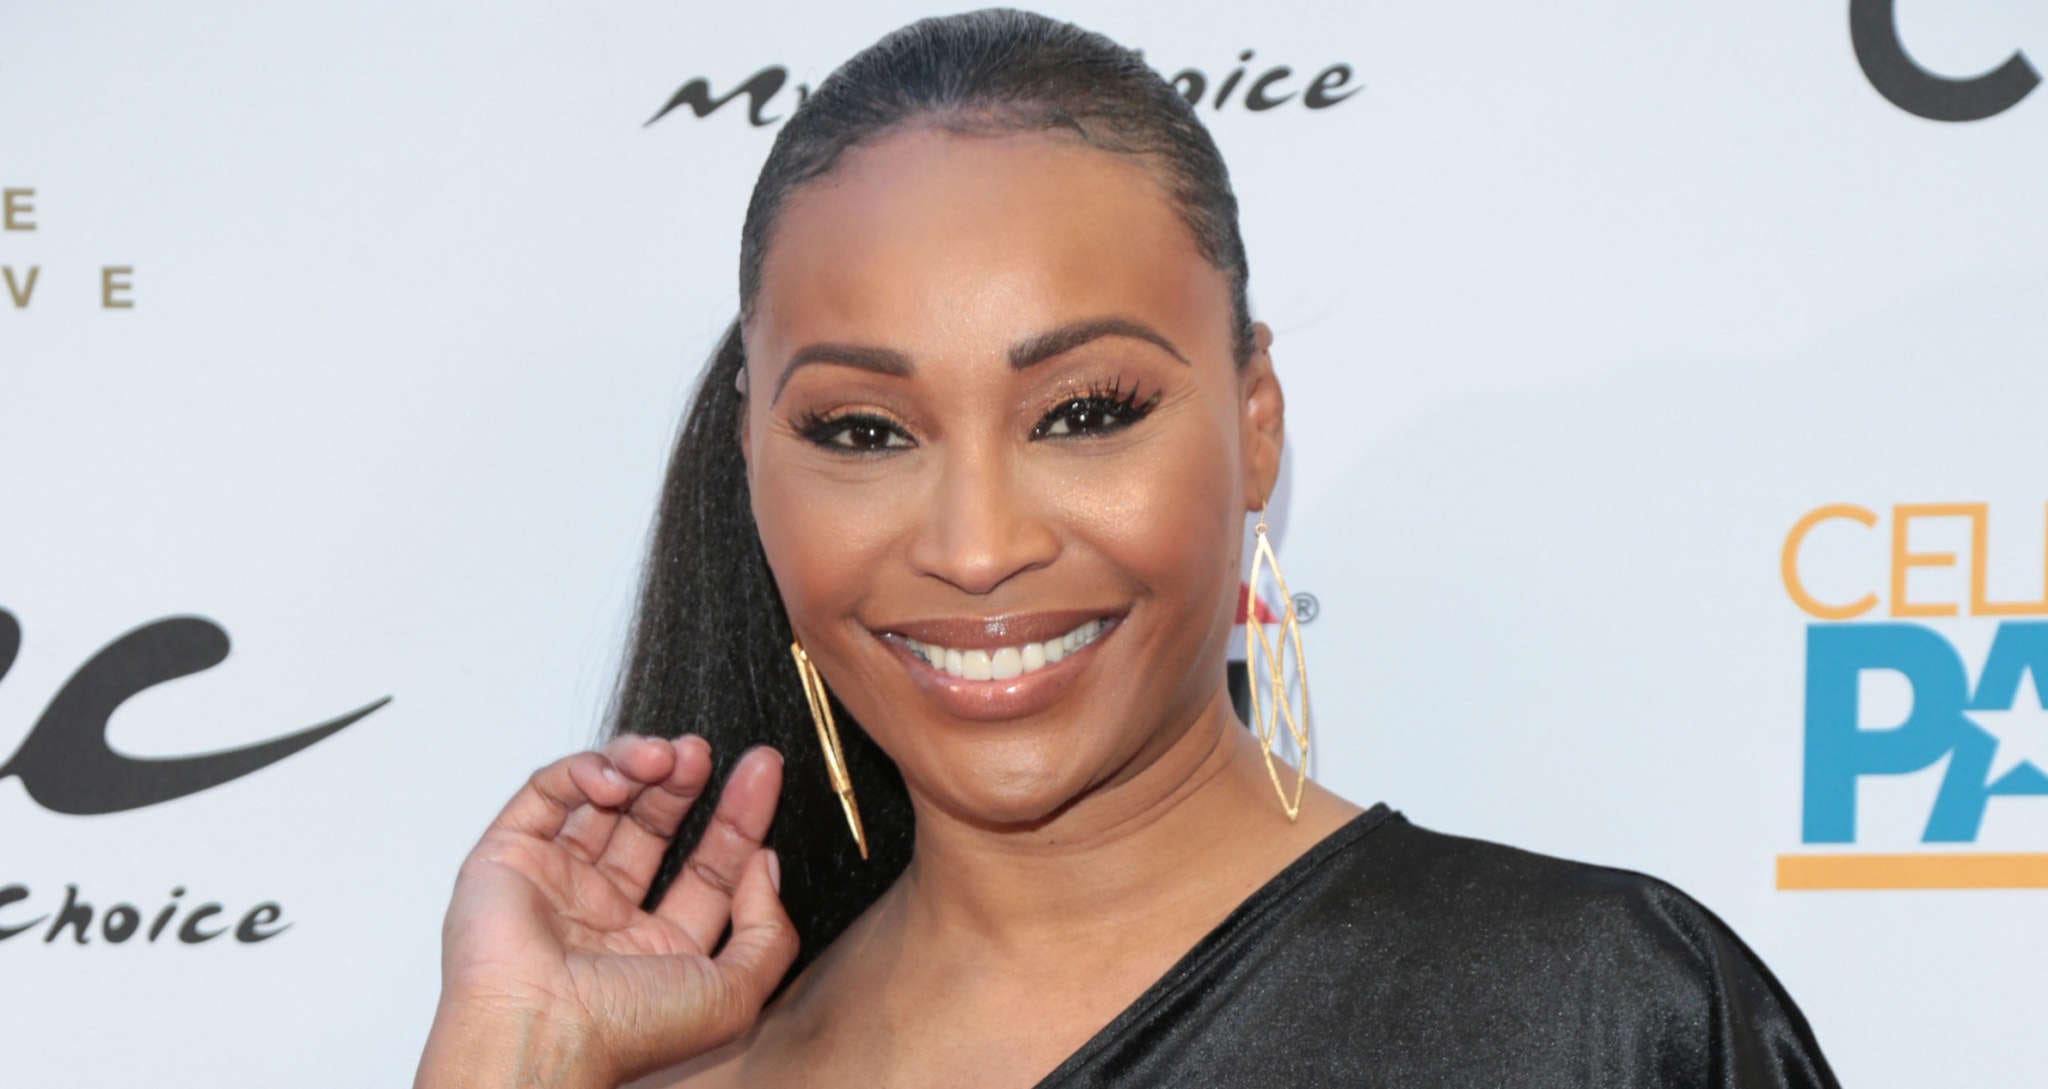 Cynthia Bailey Uses Her Platform To Raise Awareness About An Important Murder Case On Social Media